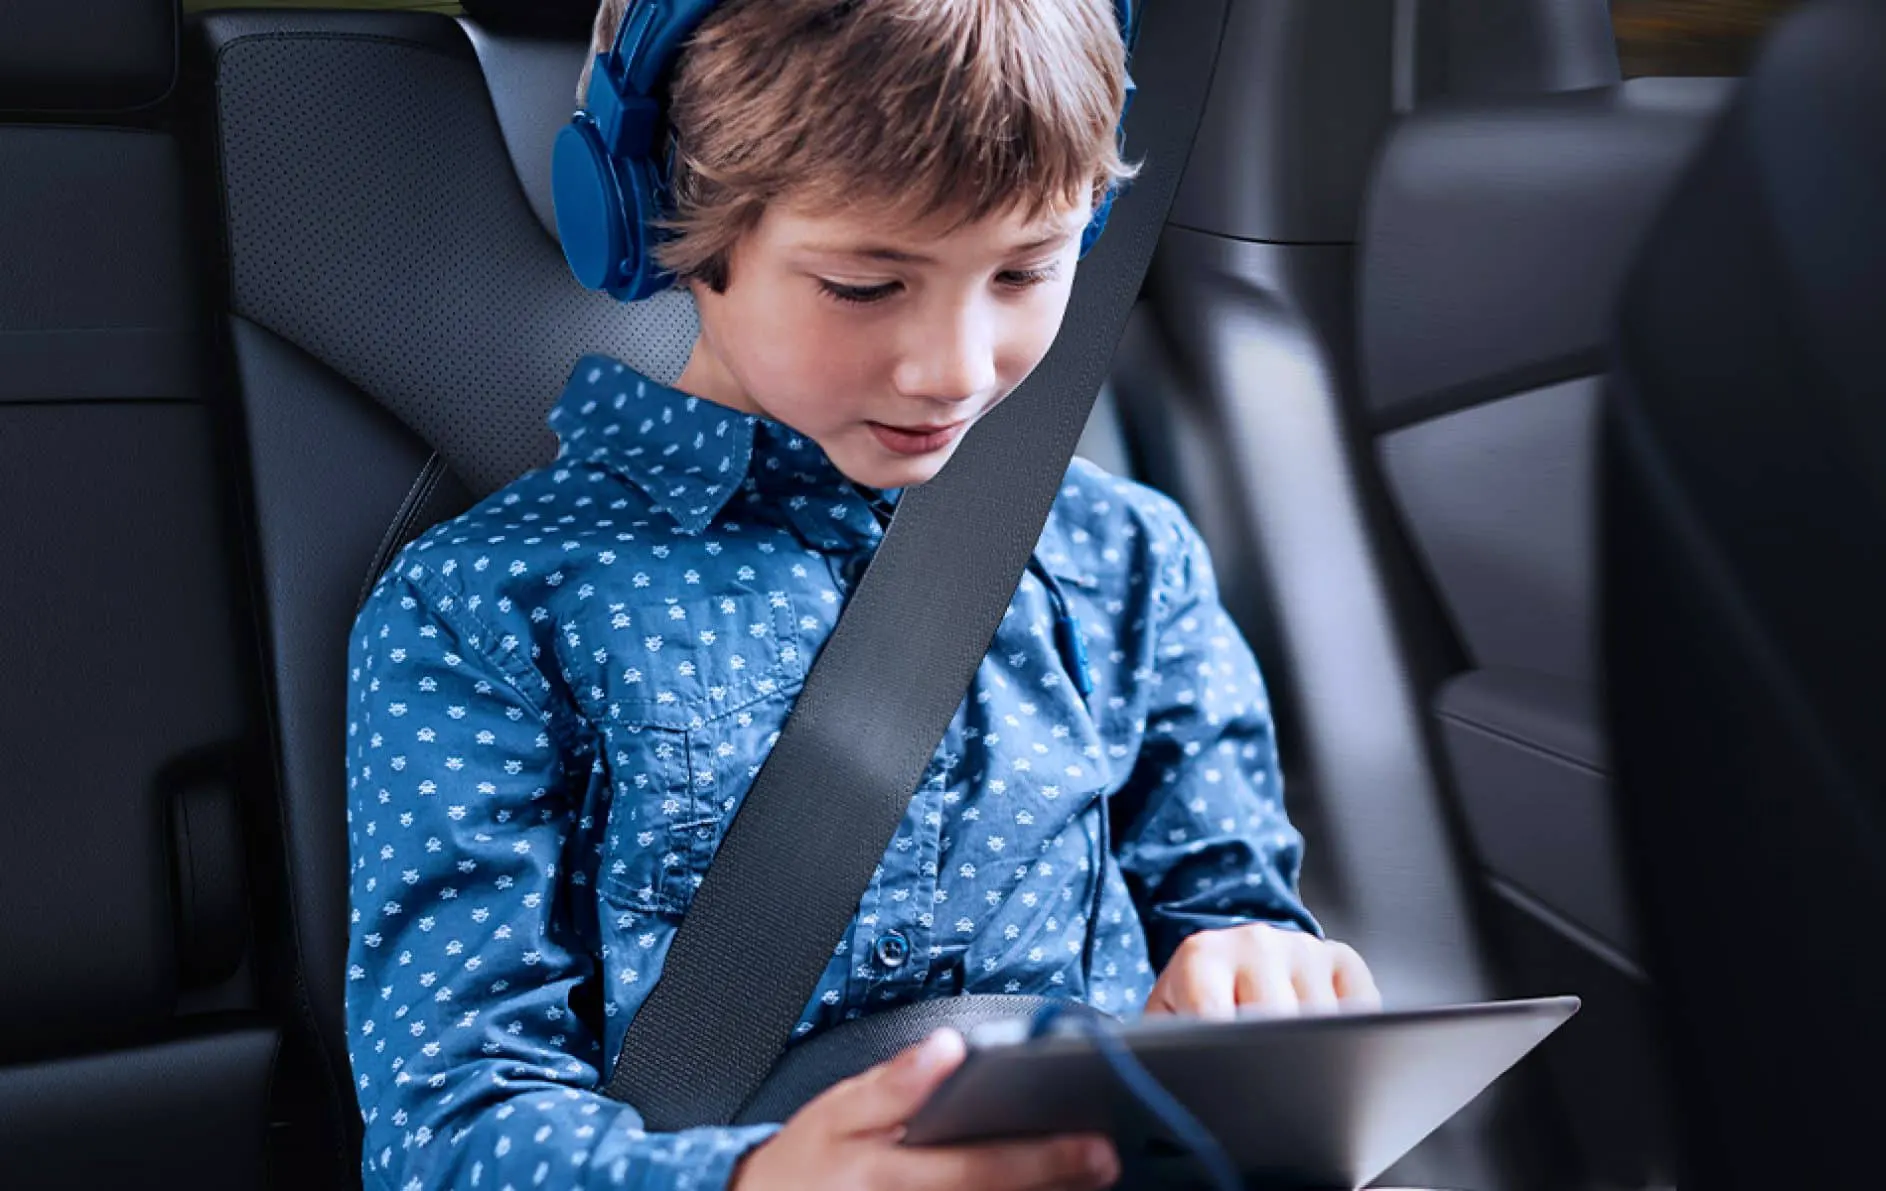 Child looking at his tablet with headphones while using the 4g hotspot